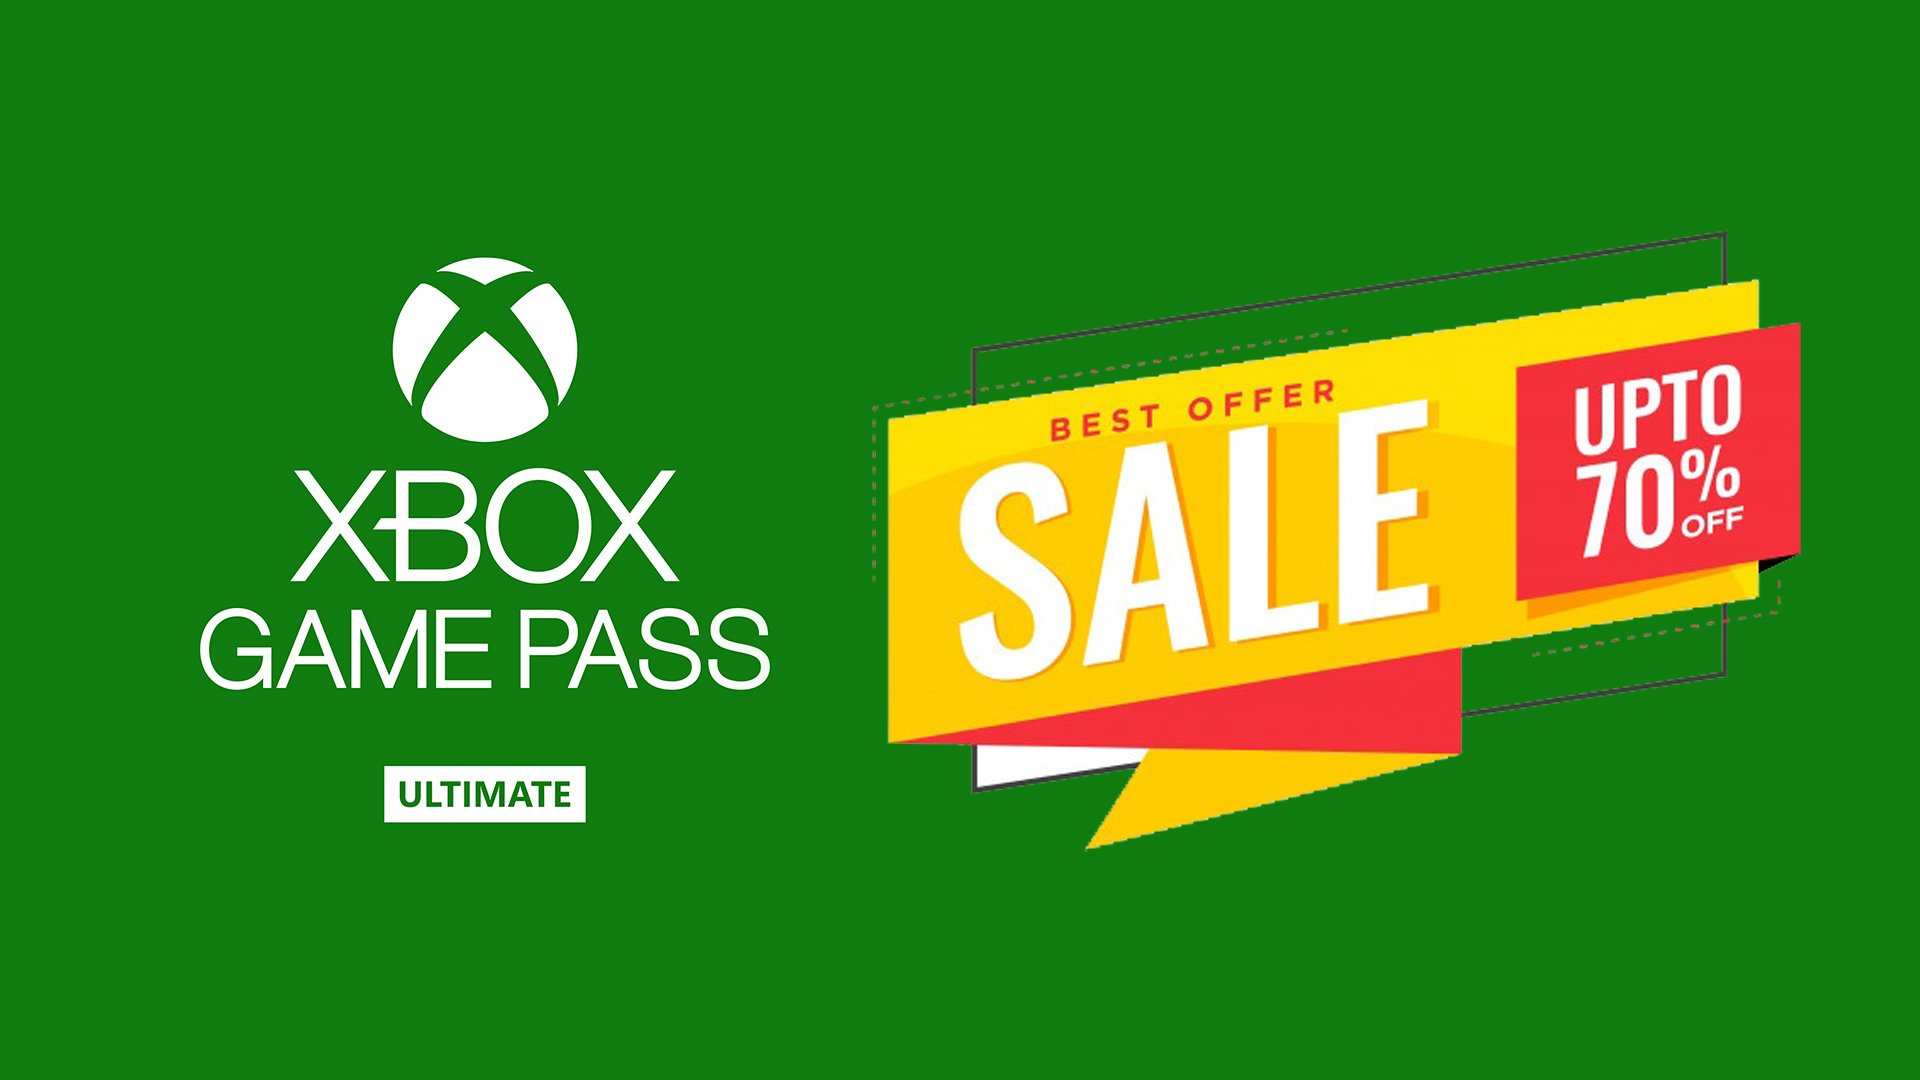 xbox game pass ultimate code d'offres acheter pas cher discount